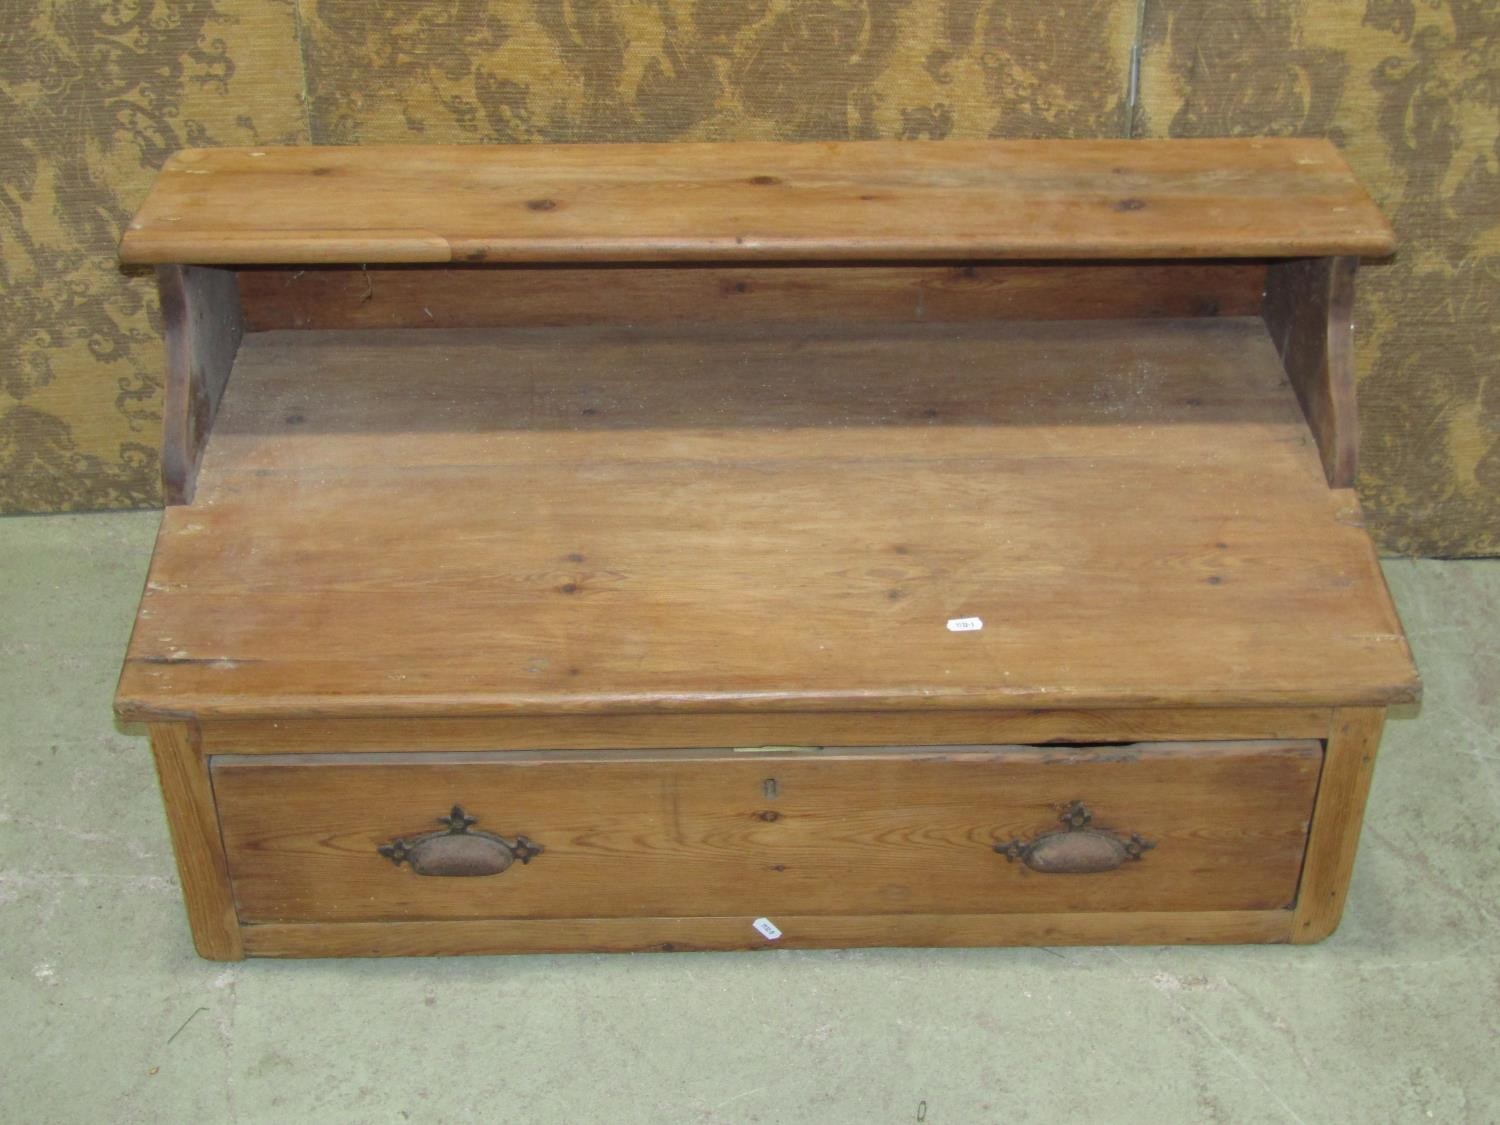 A vintage pine counter top enclosing a drawer with painted script 'Hovis Ltd' (Humphries & - Image 2 of 3